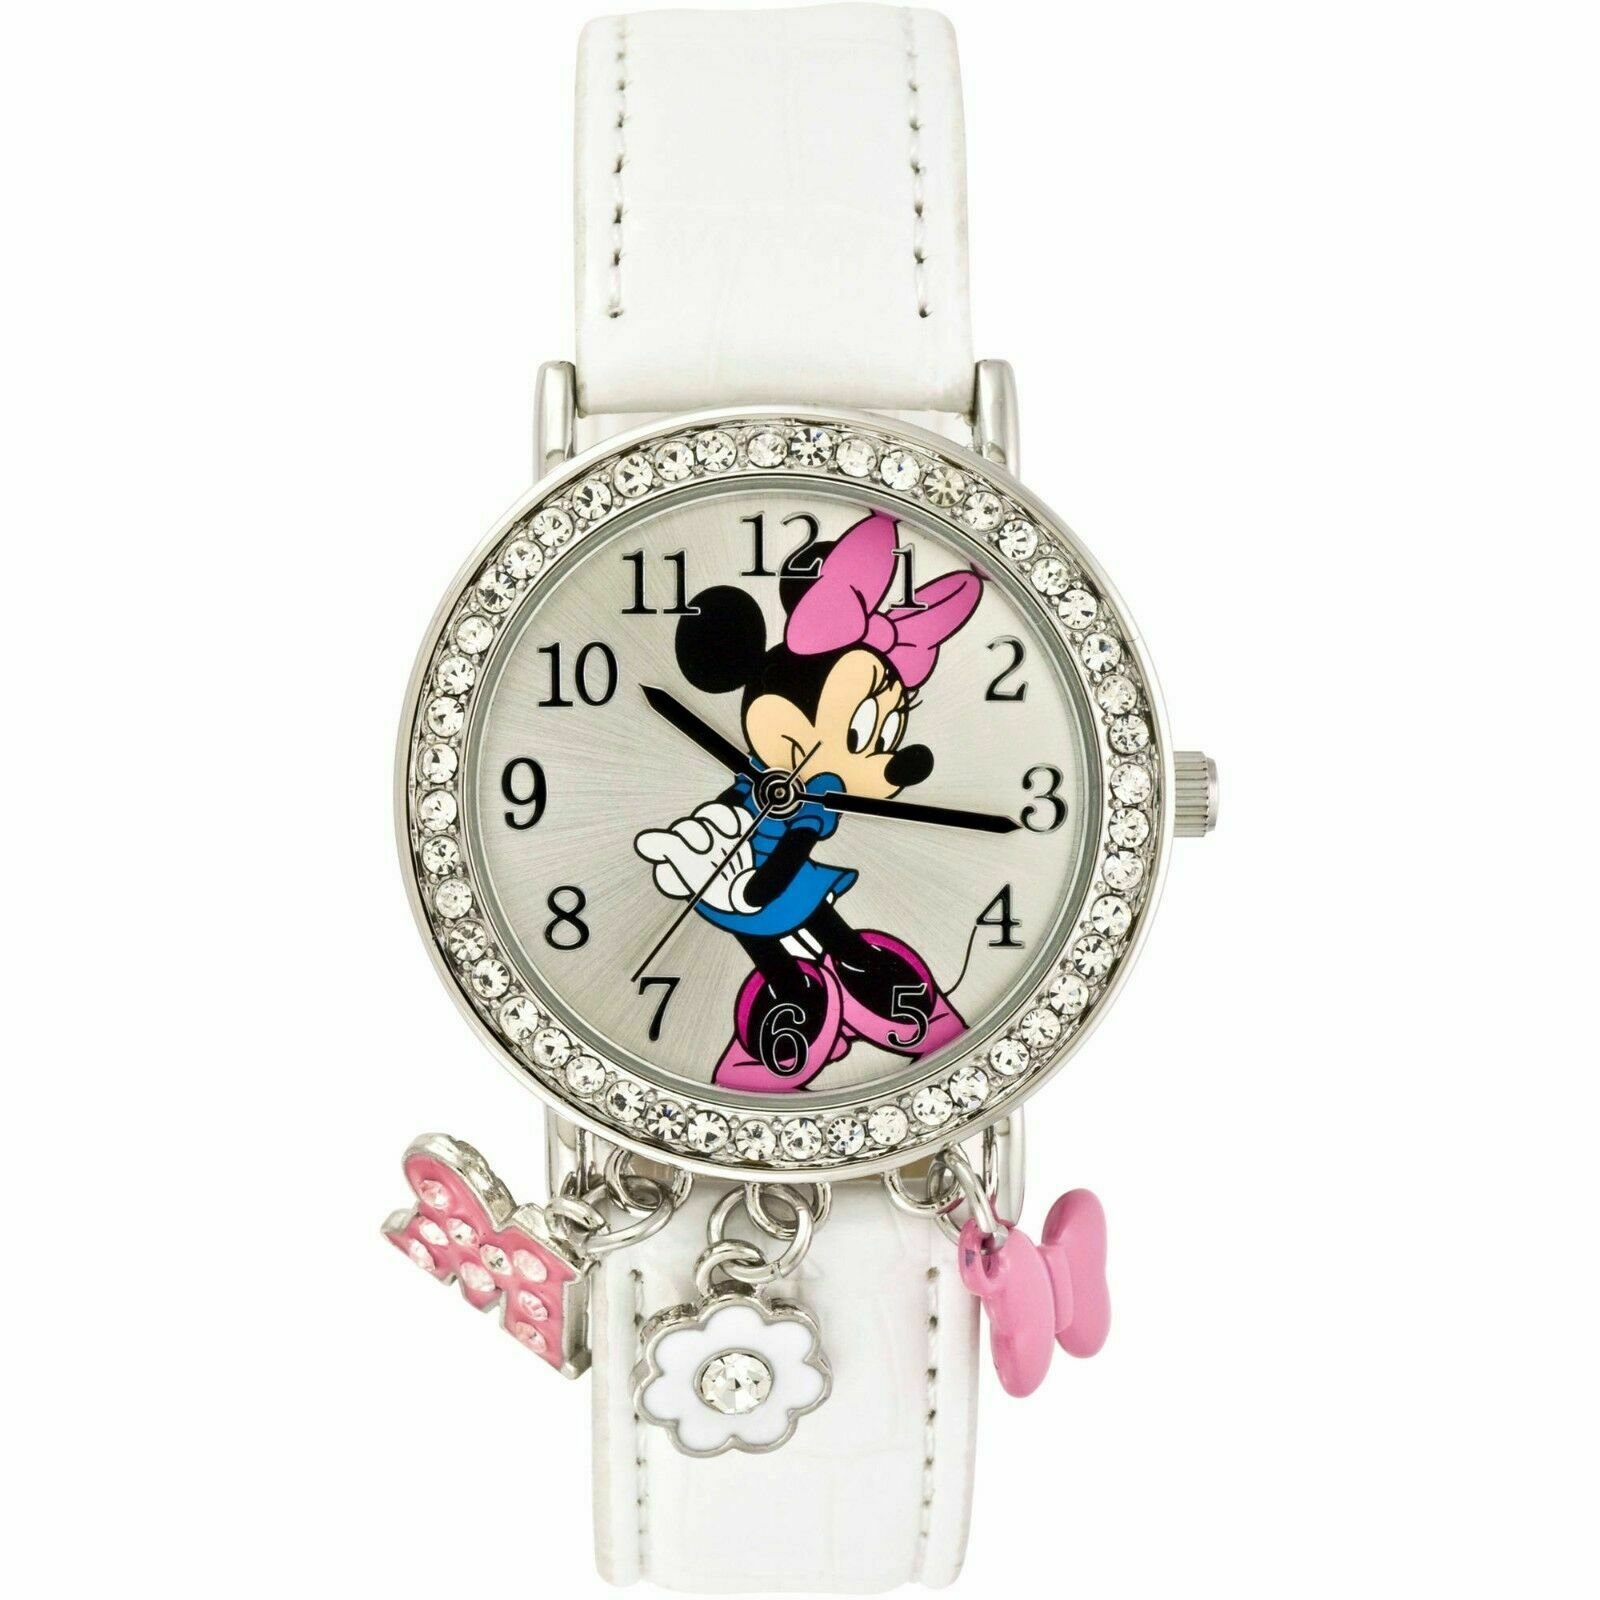 Model: Disney Minnie Mouse Analog Quartz Watch with Dangle Charms and Faux Crocodile Strap